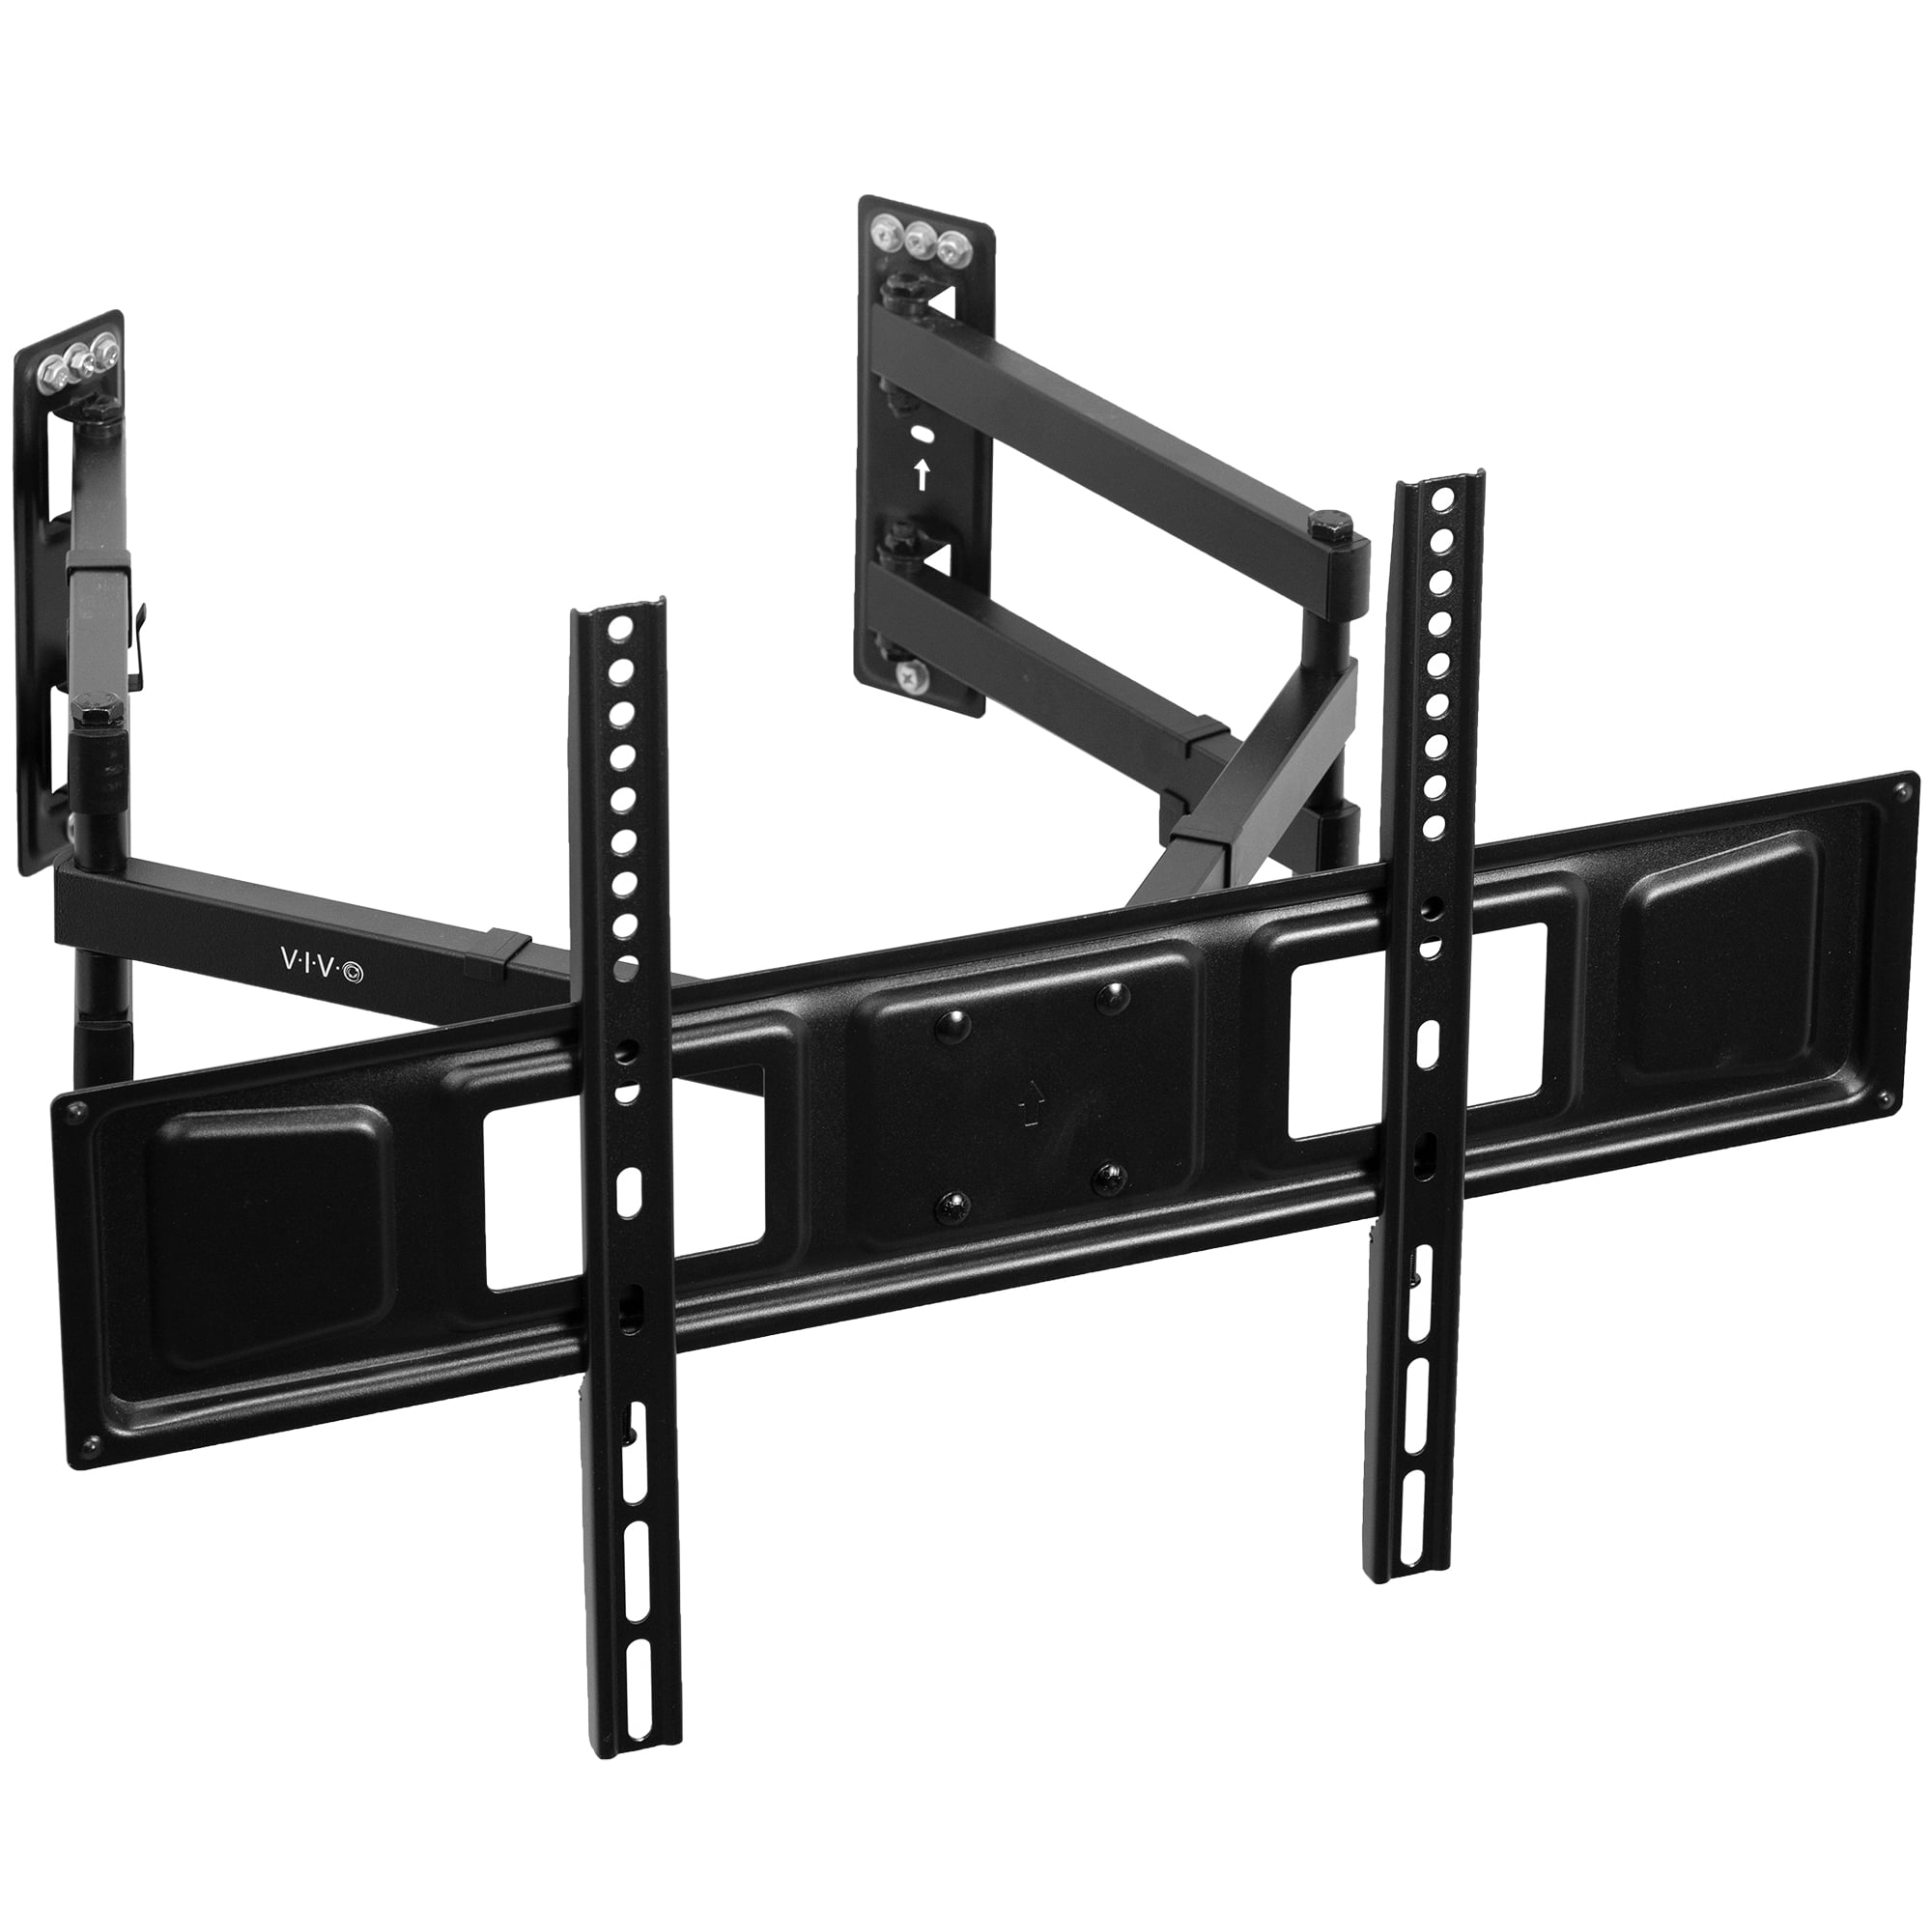 Up to 85" Large TV Wall Mount Bracket Cantilever Tilt Fixed for Brick /Stud Wood 